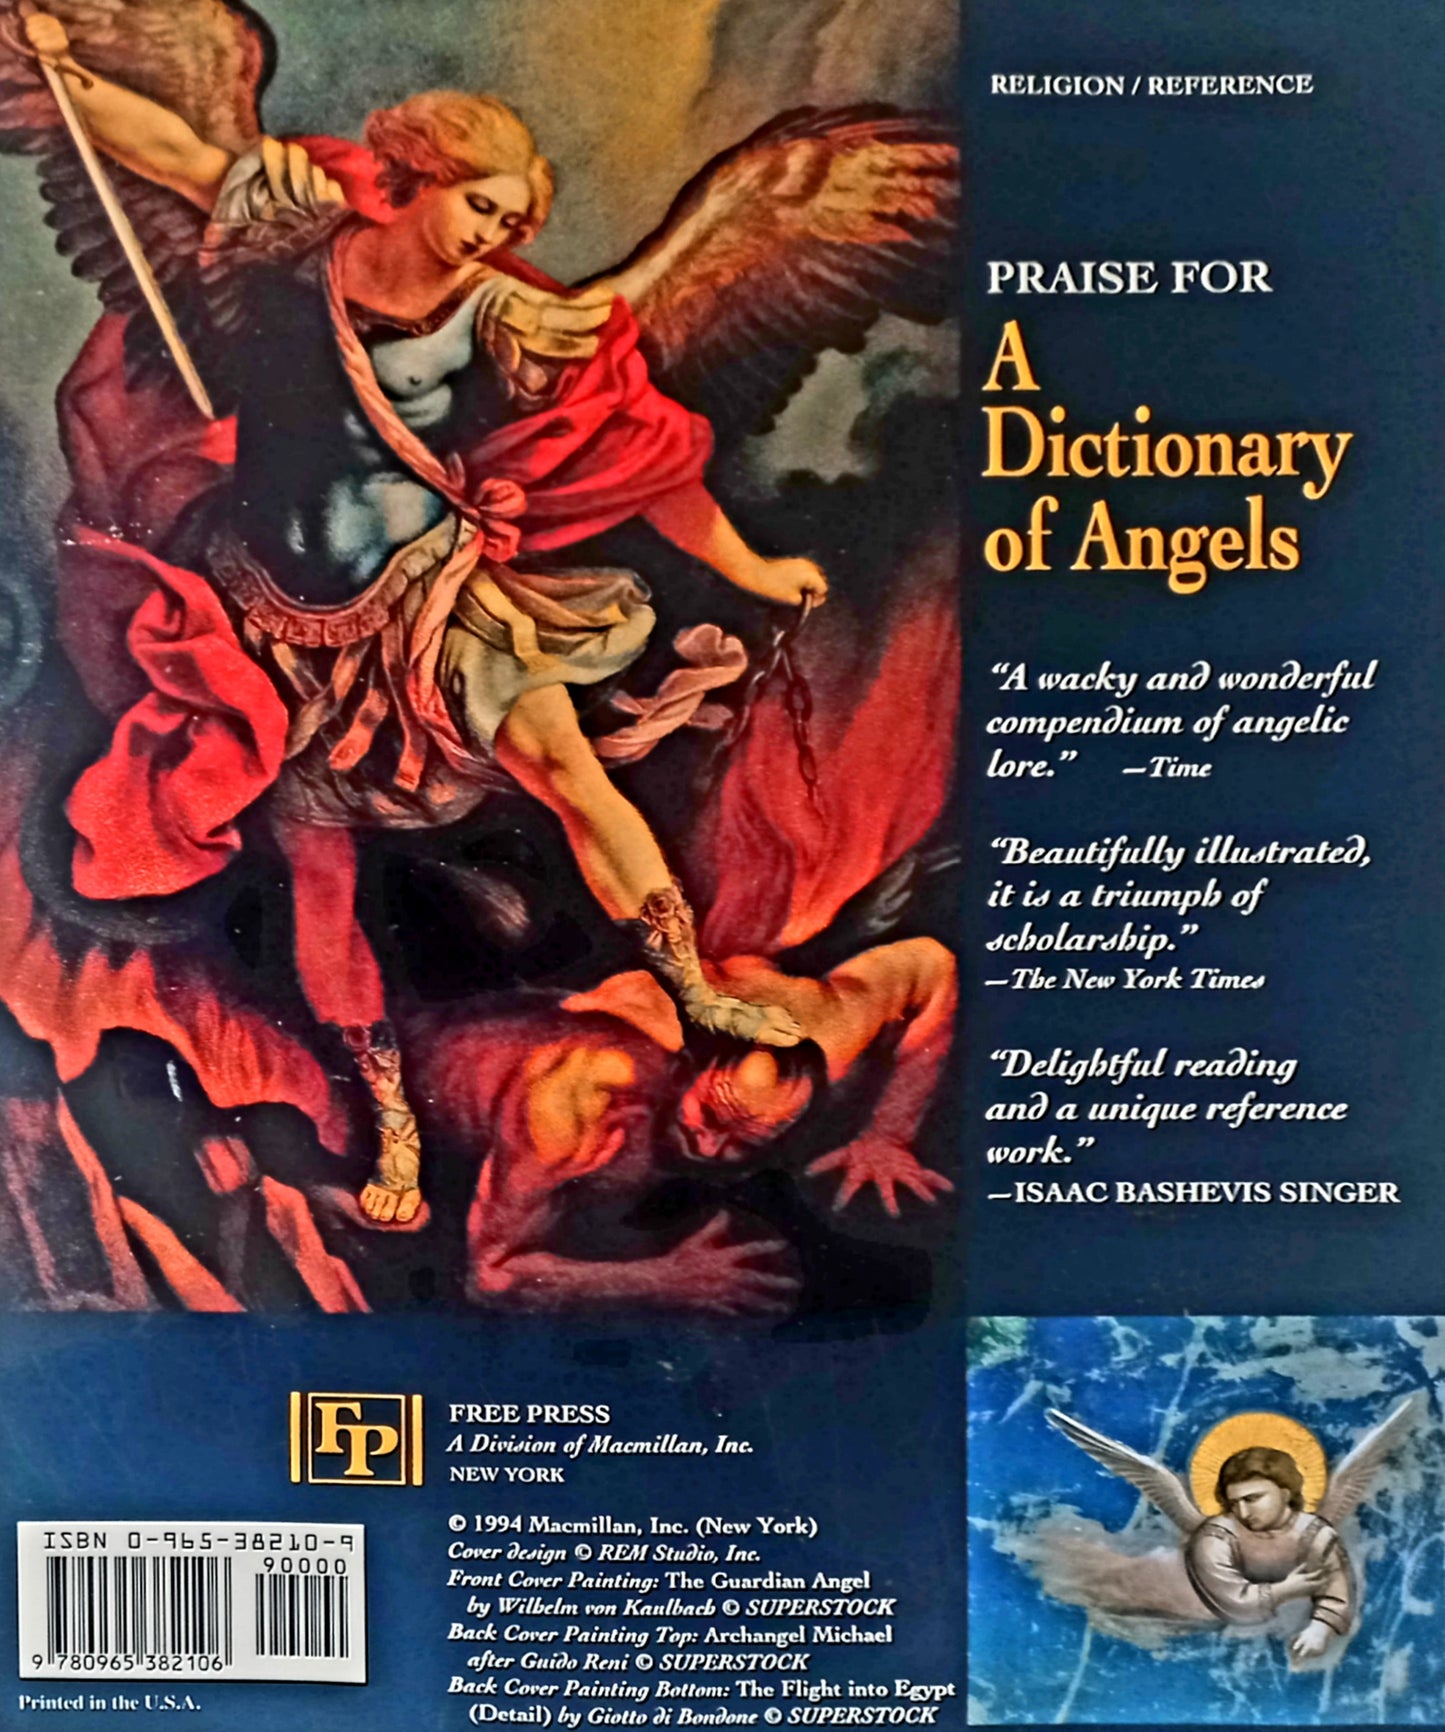 A Dictionary of Angels: Including the Fallen Angels